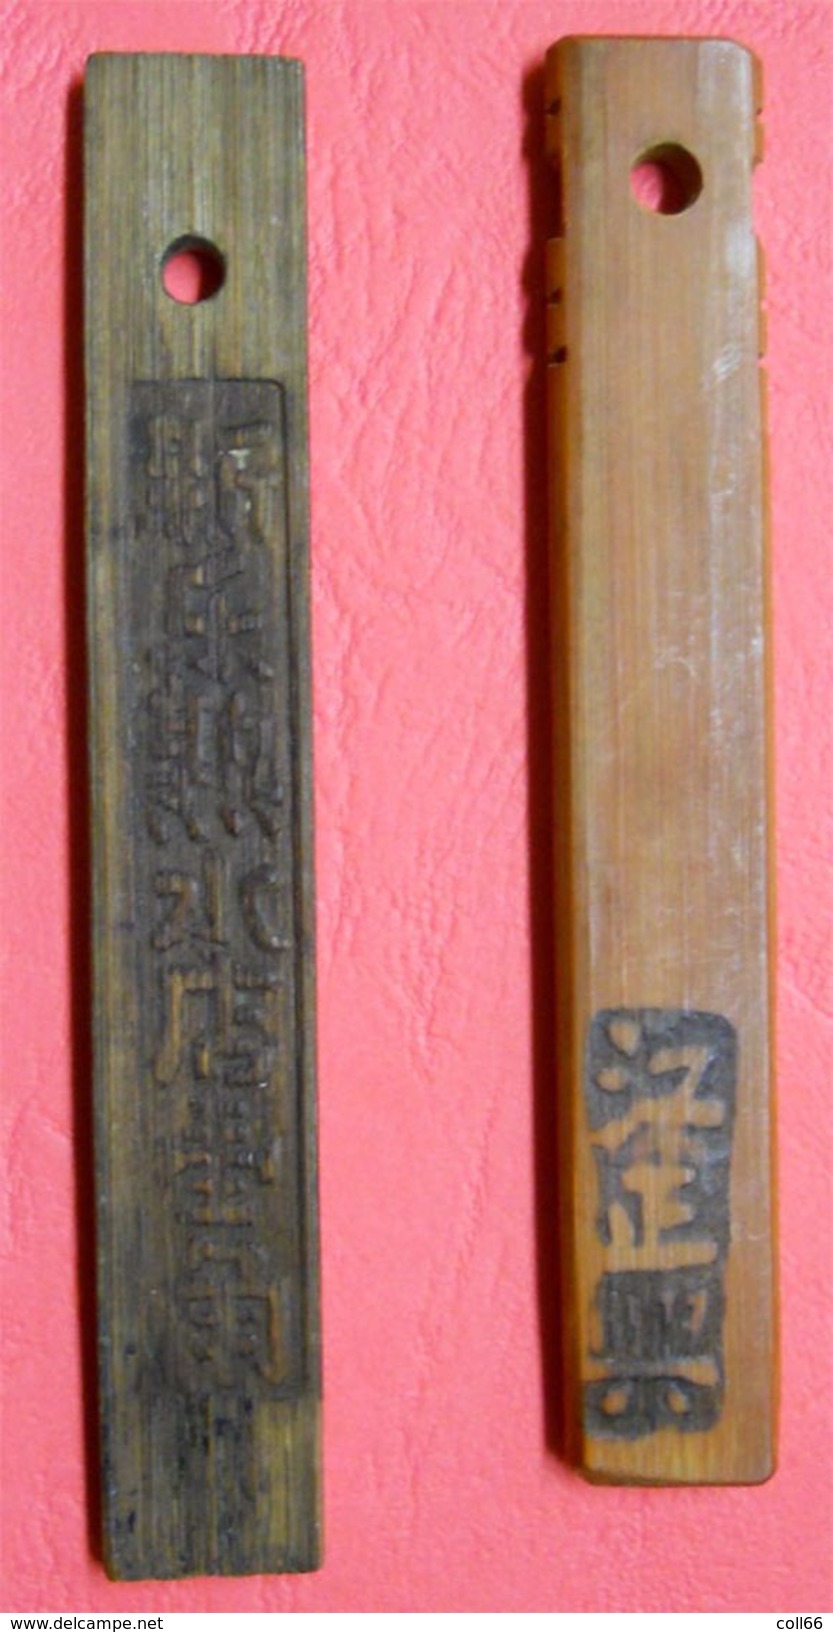 2 Monnaies Chinoises Type Bambou 2 Chinese Curency Bamboo Type  Lg 10 Et 9.7 Cm 3 Gr Et 5 Gr Bois Wood - Chinoises